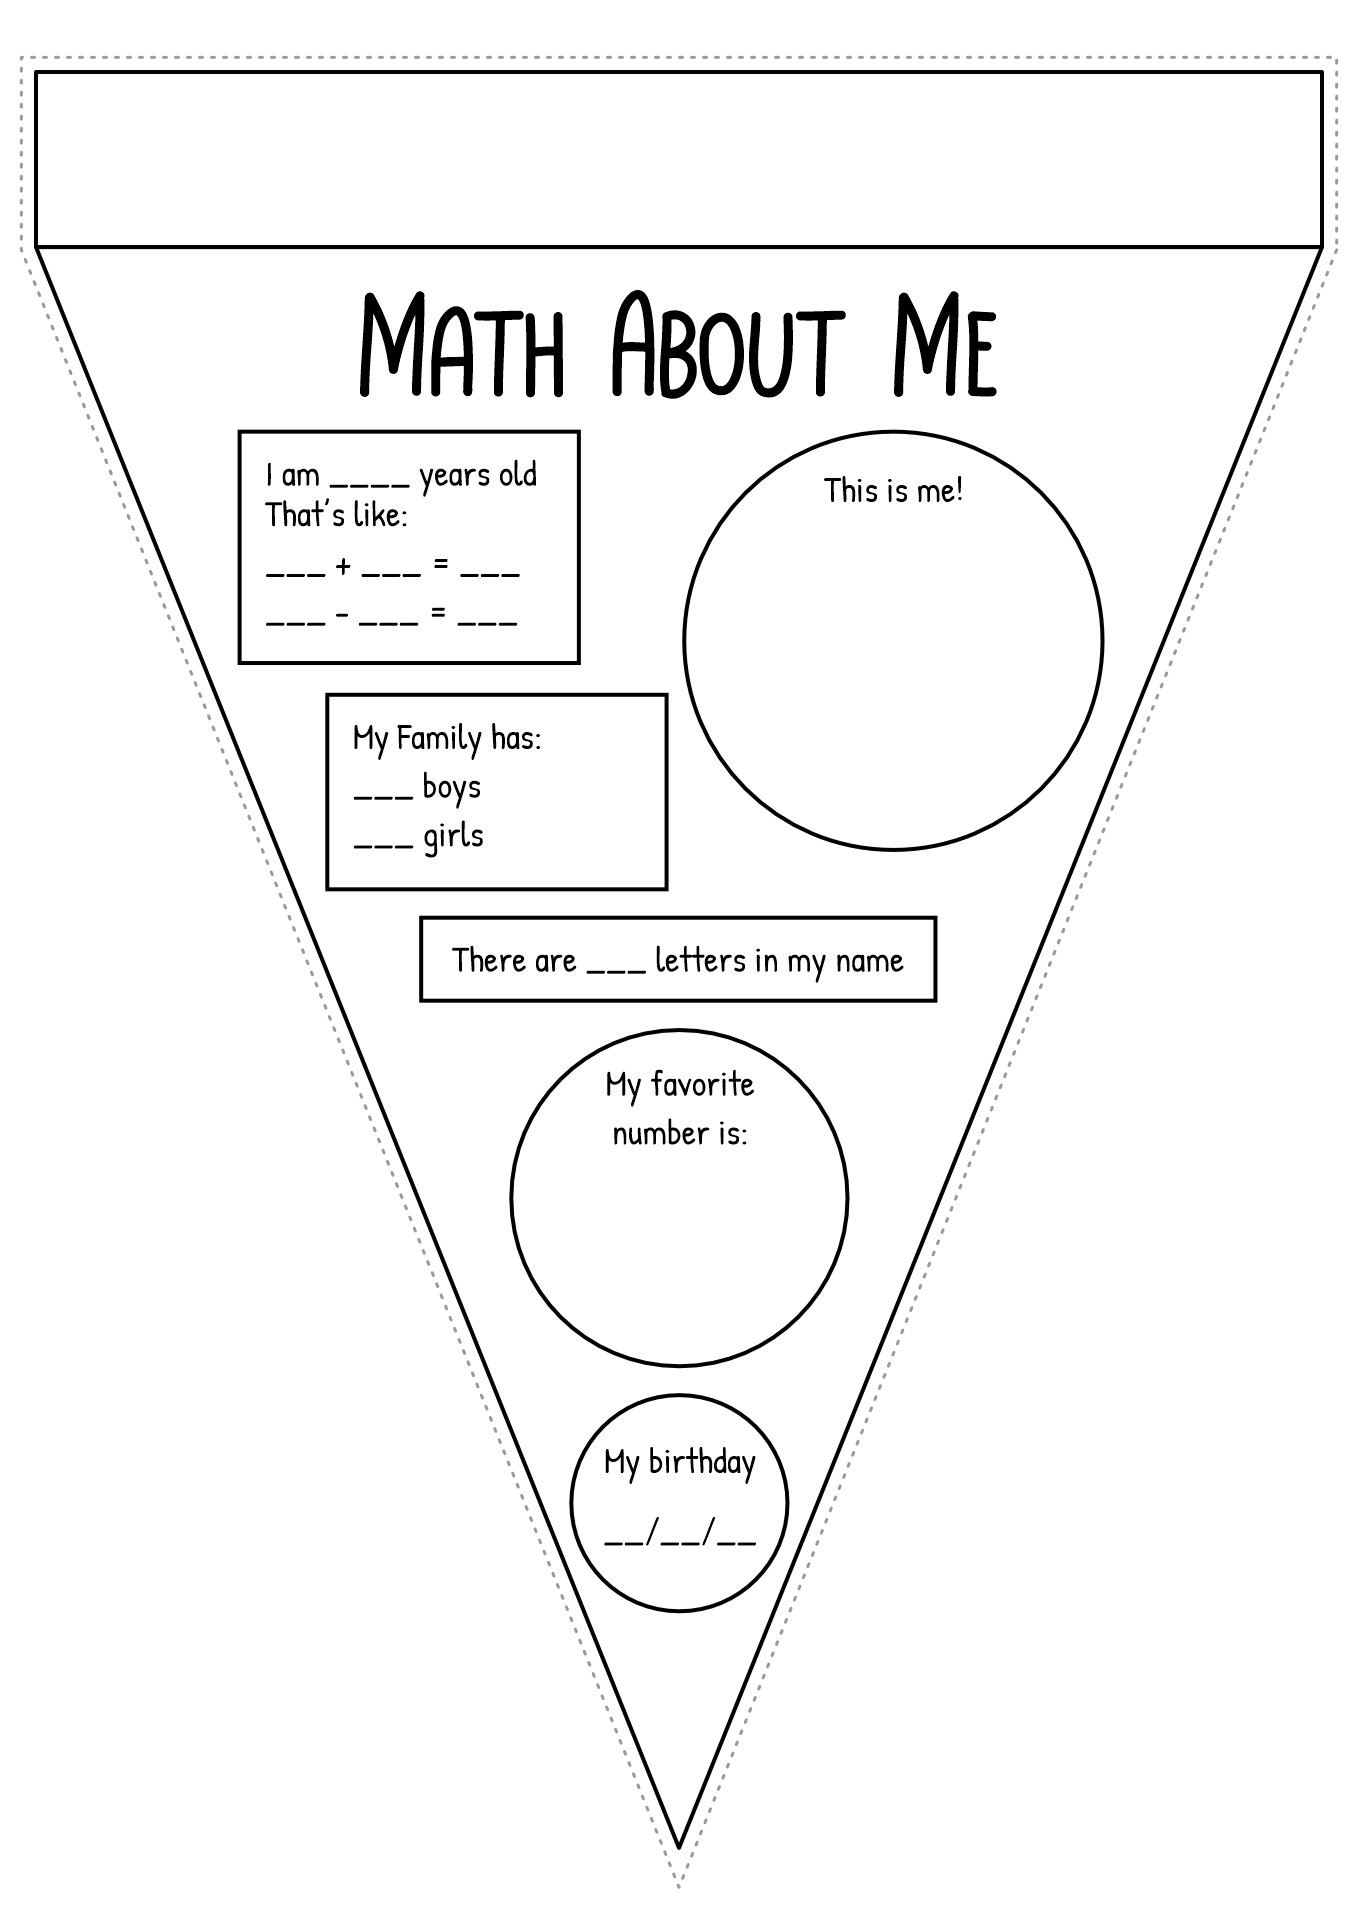 Math About.me Banner